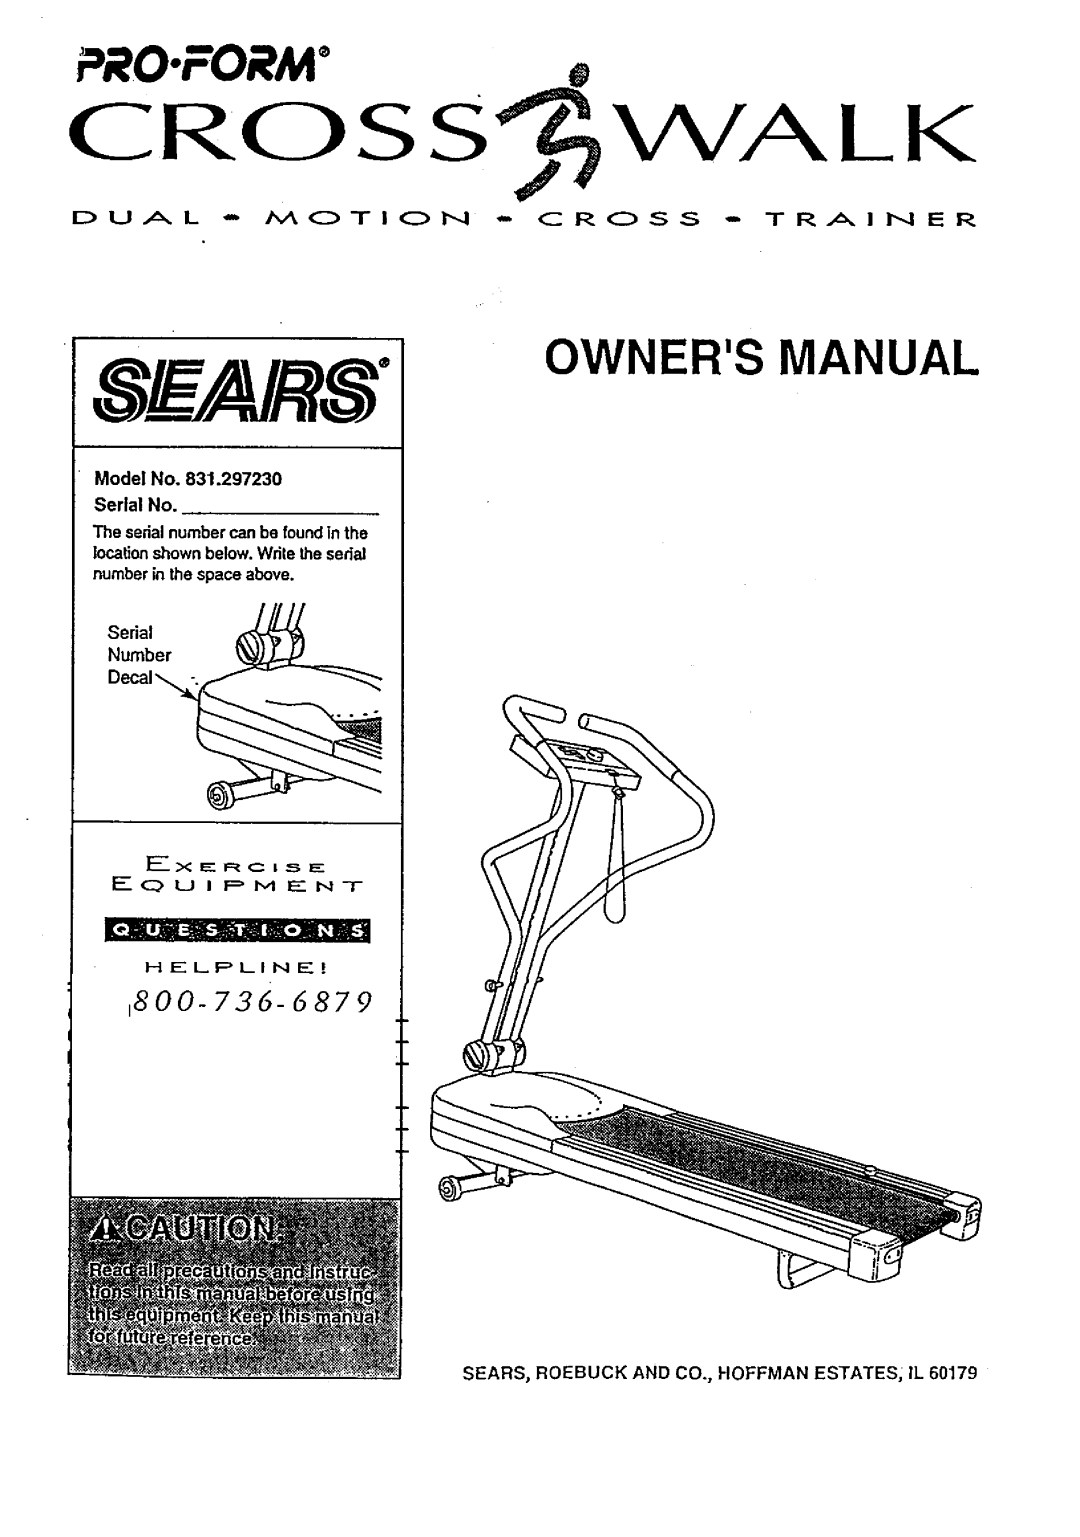 Sears 831.29723 owner manual Dual--Motion*Cross, Serial Number, Trainer, Sears, Roebuck And Co., Hoffman Estates, Il 